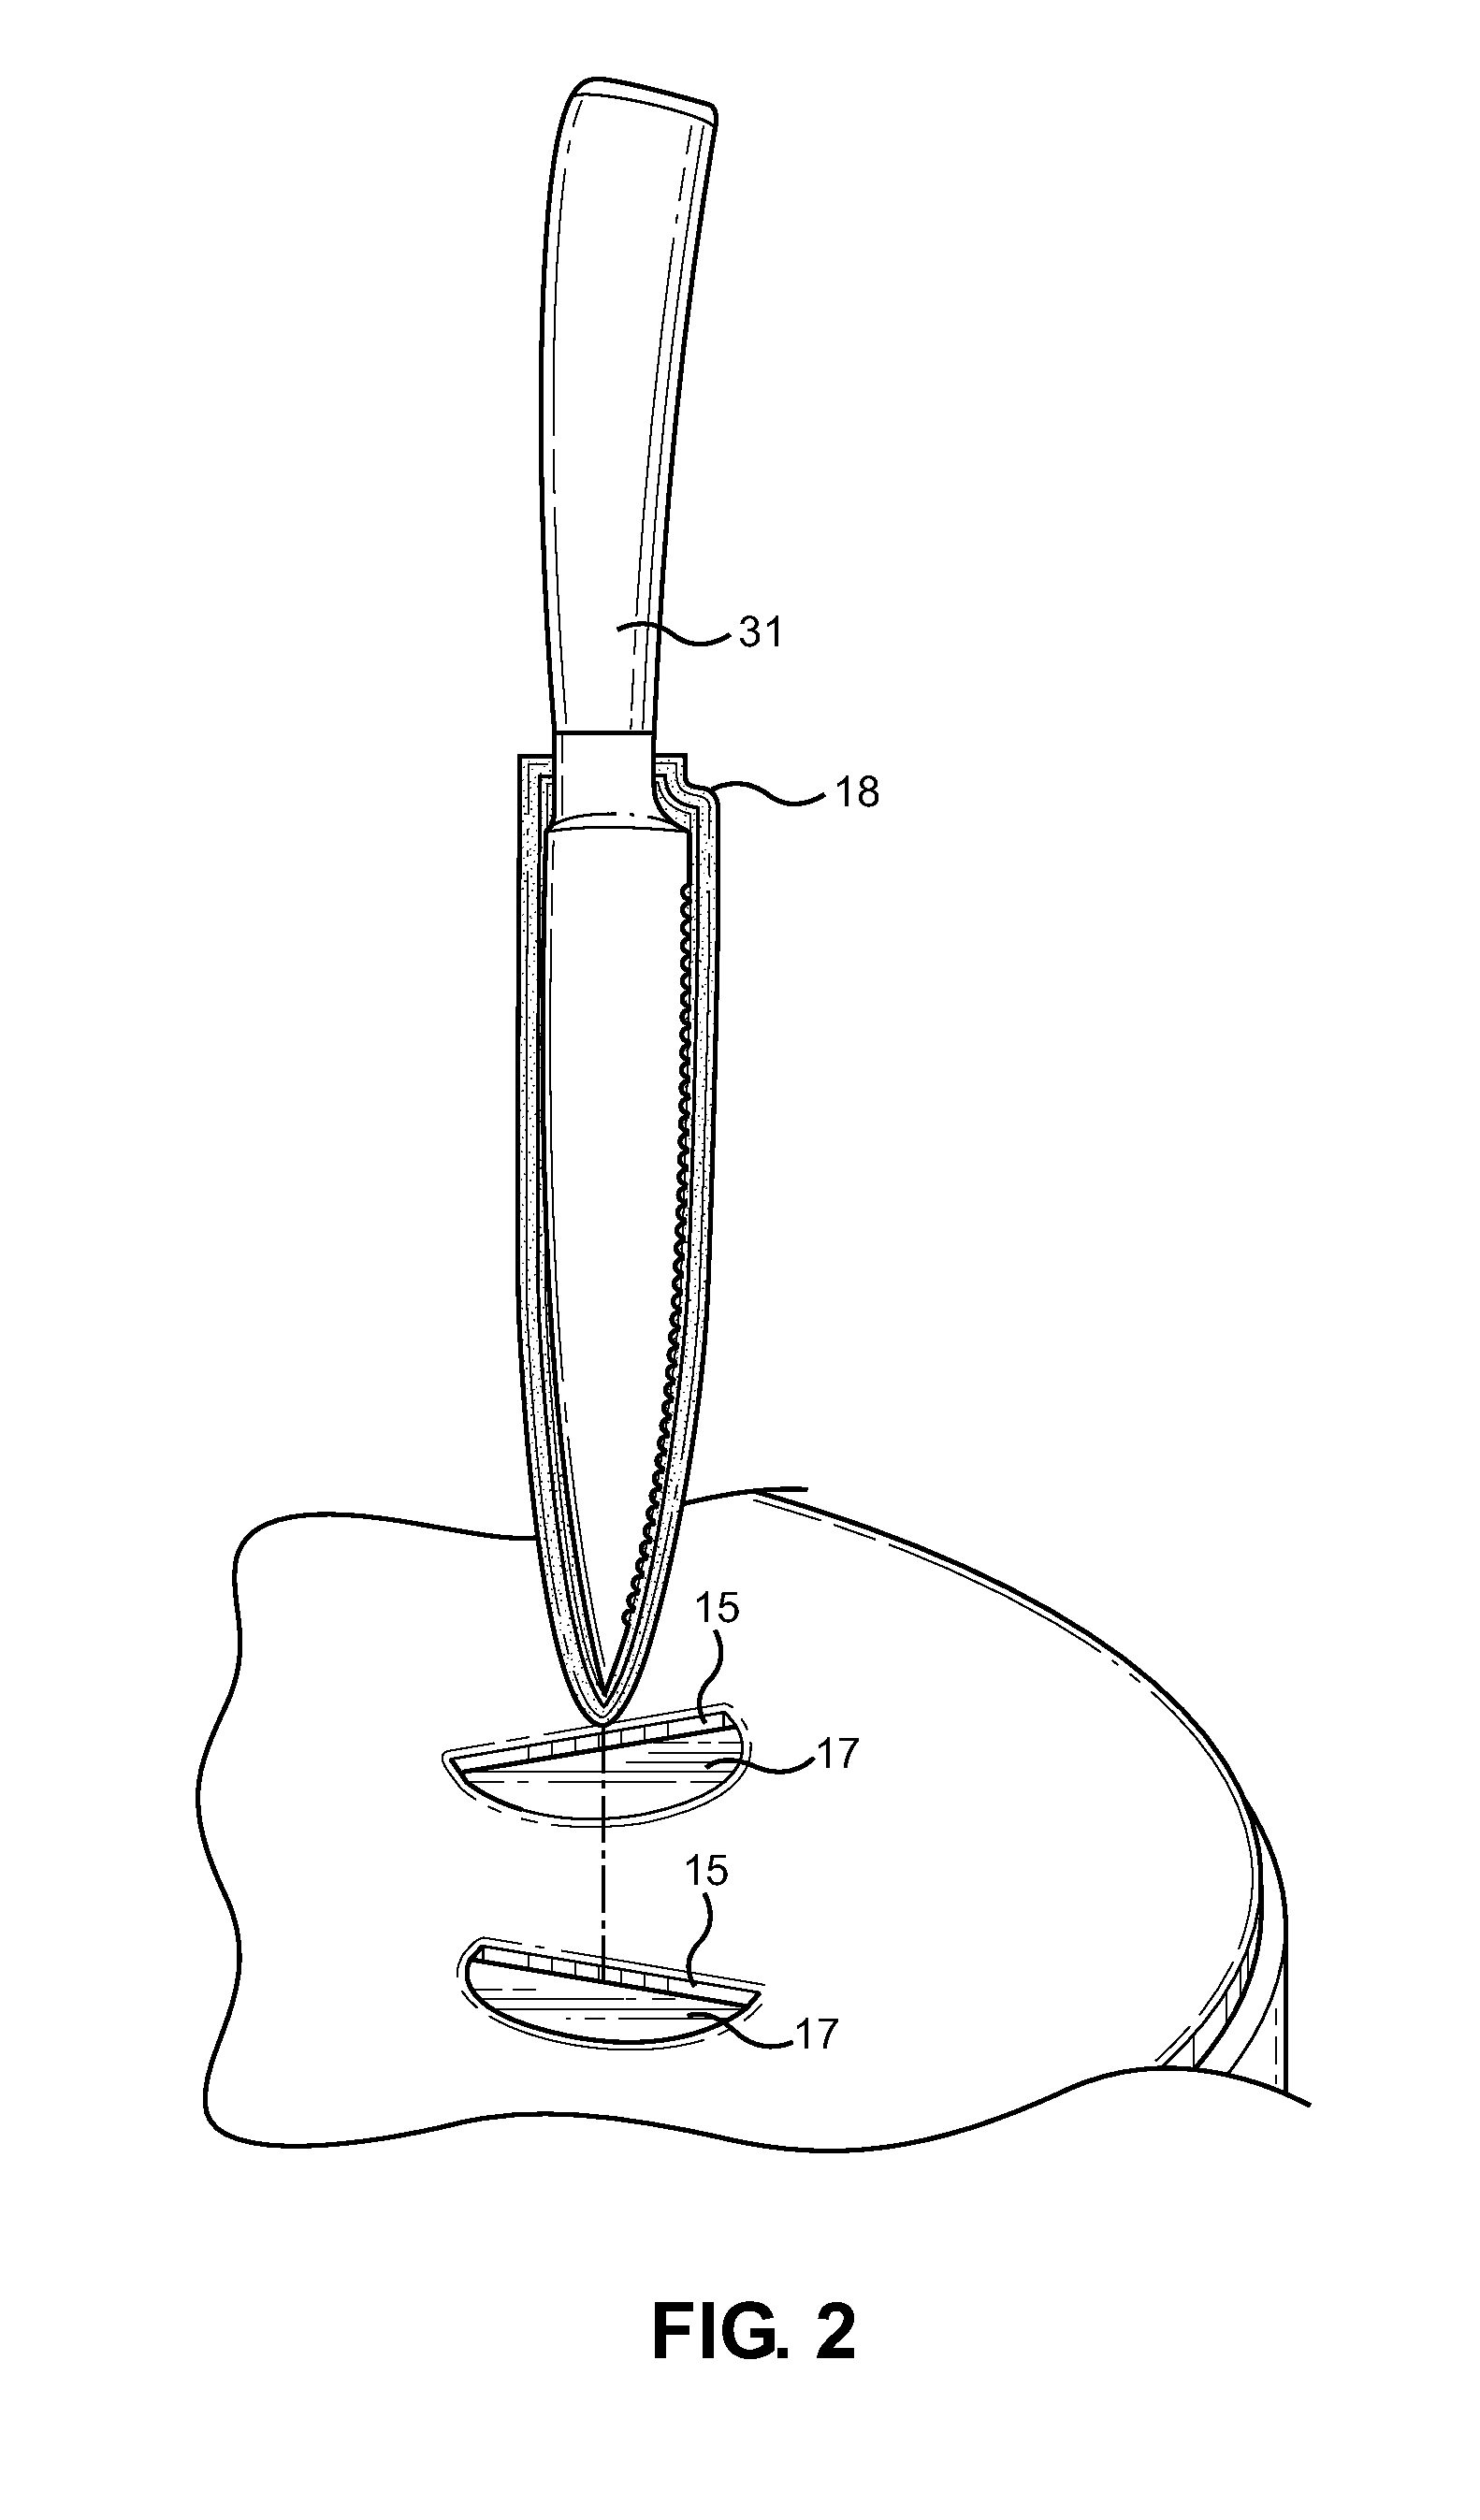 Combination Shipping and Display Device for Merchandise